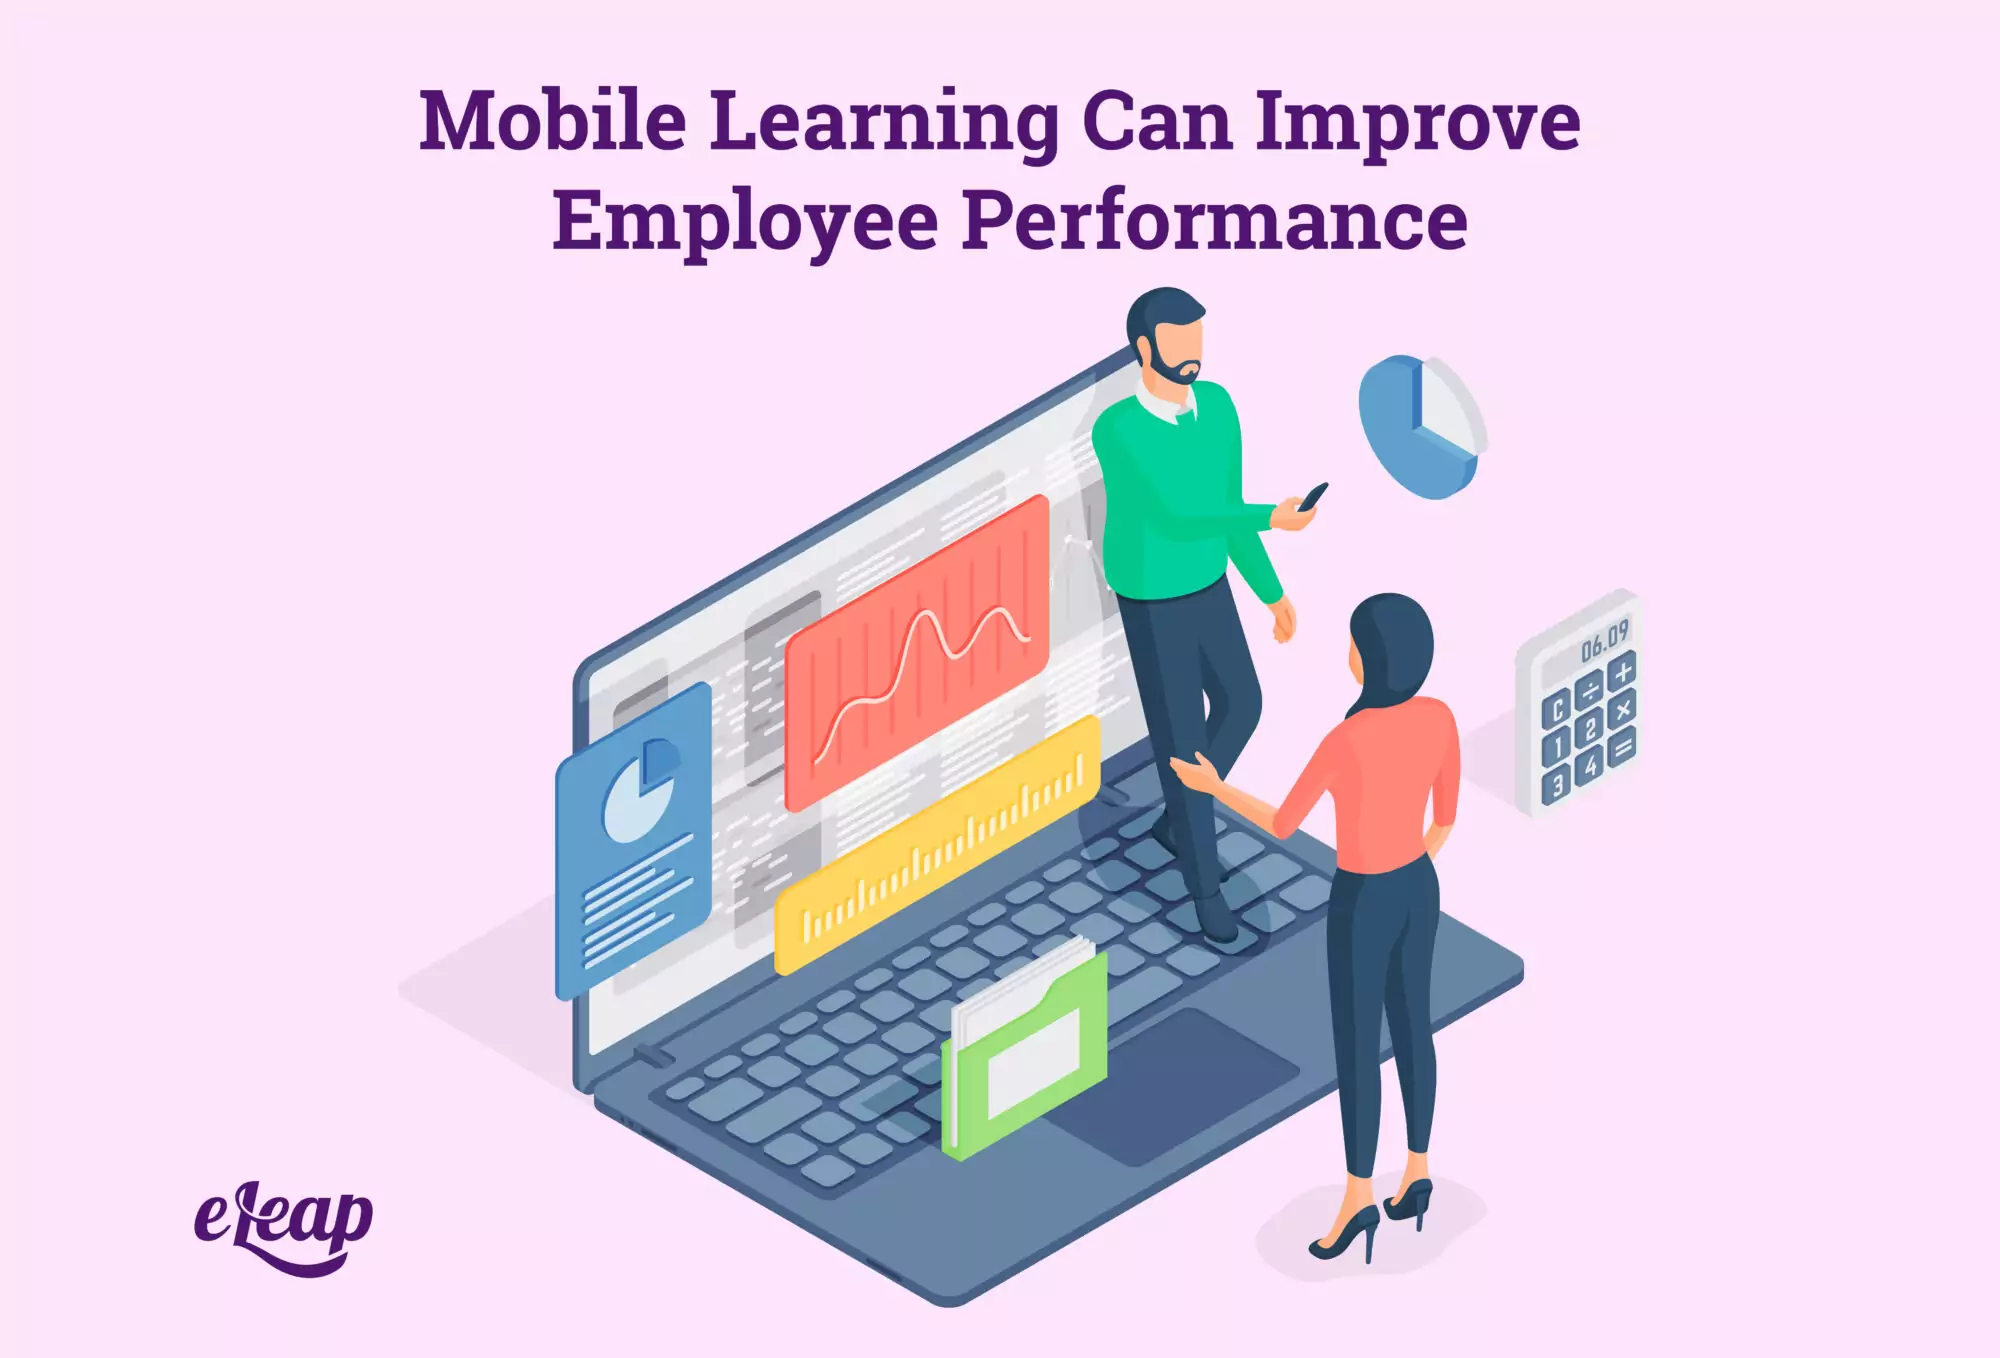 Mobile Learning Can Improve Employee Performance